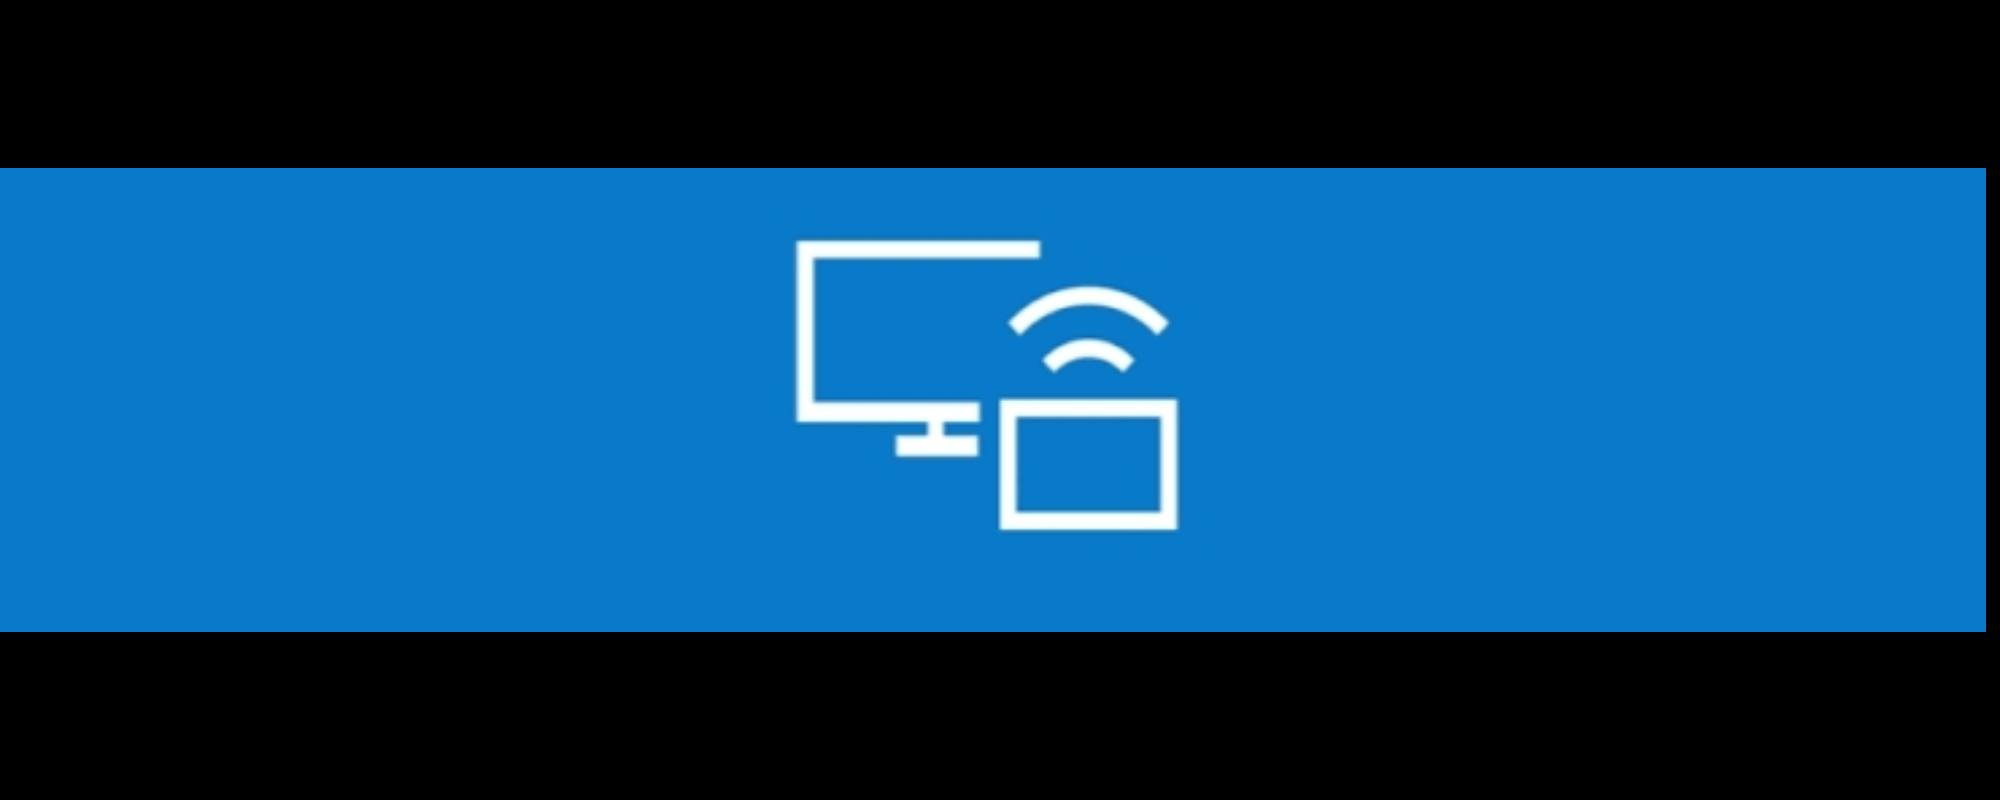 Adding and deleting the wireless display feature on your Windows 10 computer